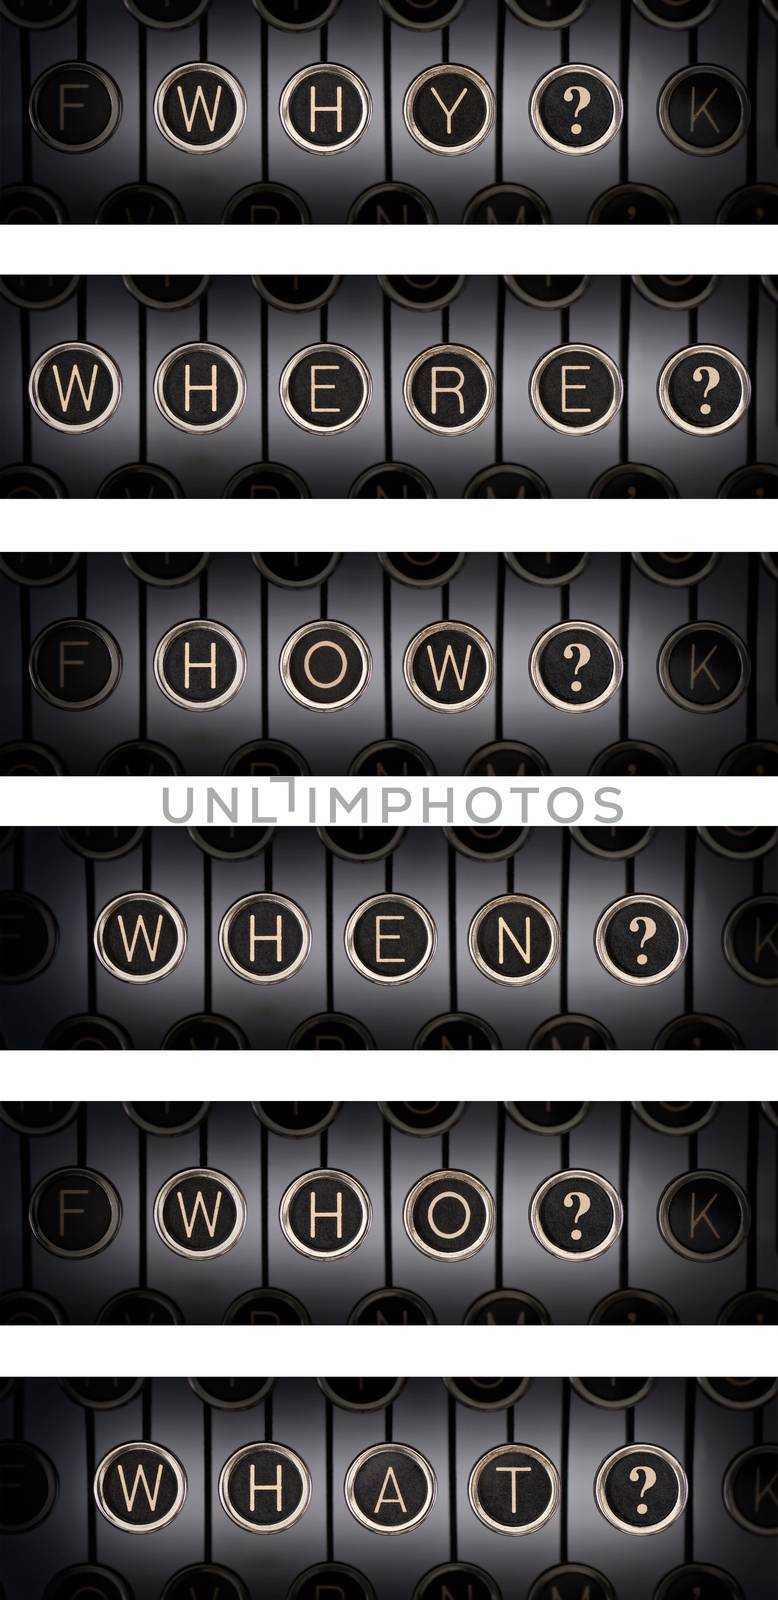 Six vintage style banners composed from old manual typewriter keyboards that spell out "WHY?", "WHERE?", "HOW?", "WHEN?", "WHO?" and "WHAT?"  Lighting and focus are centered on each word.